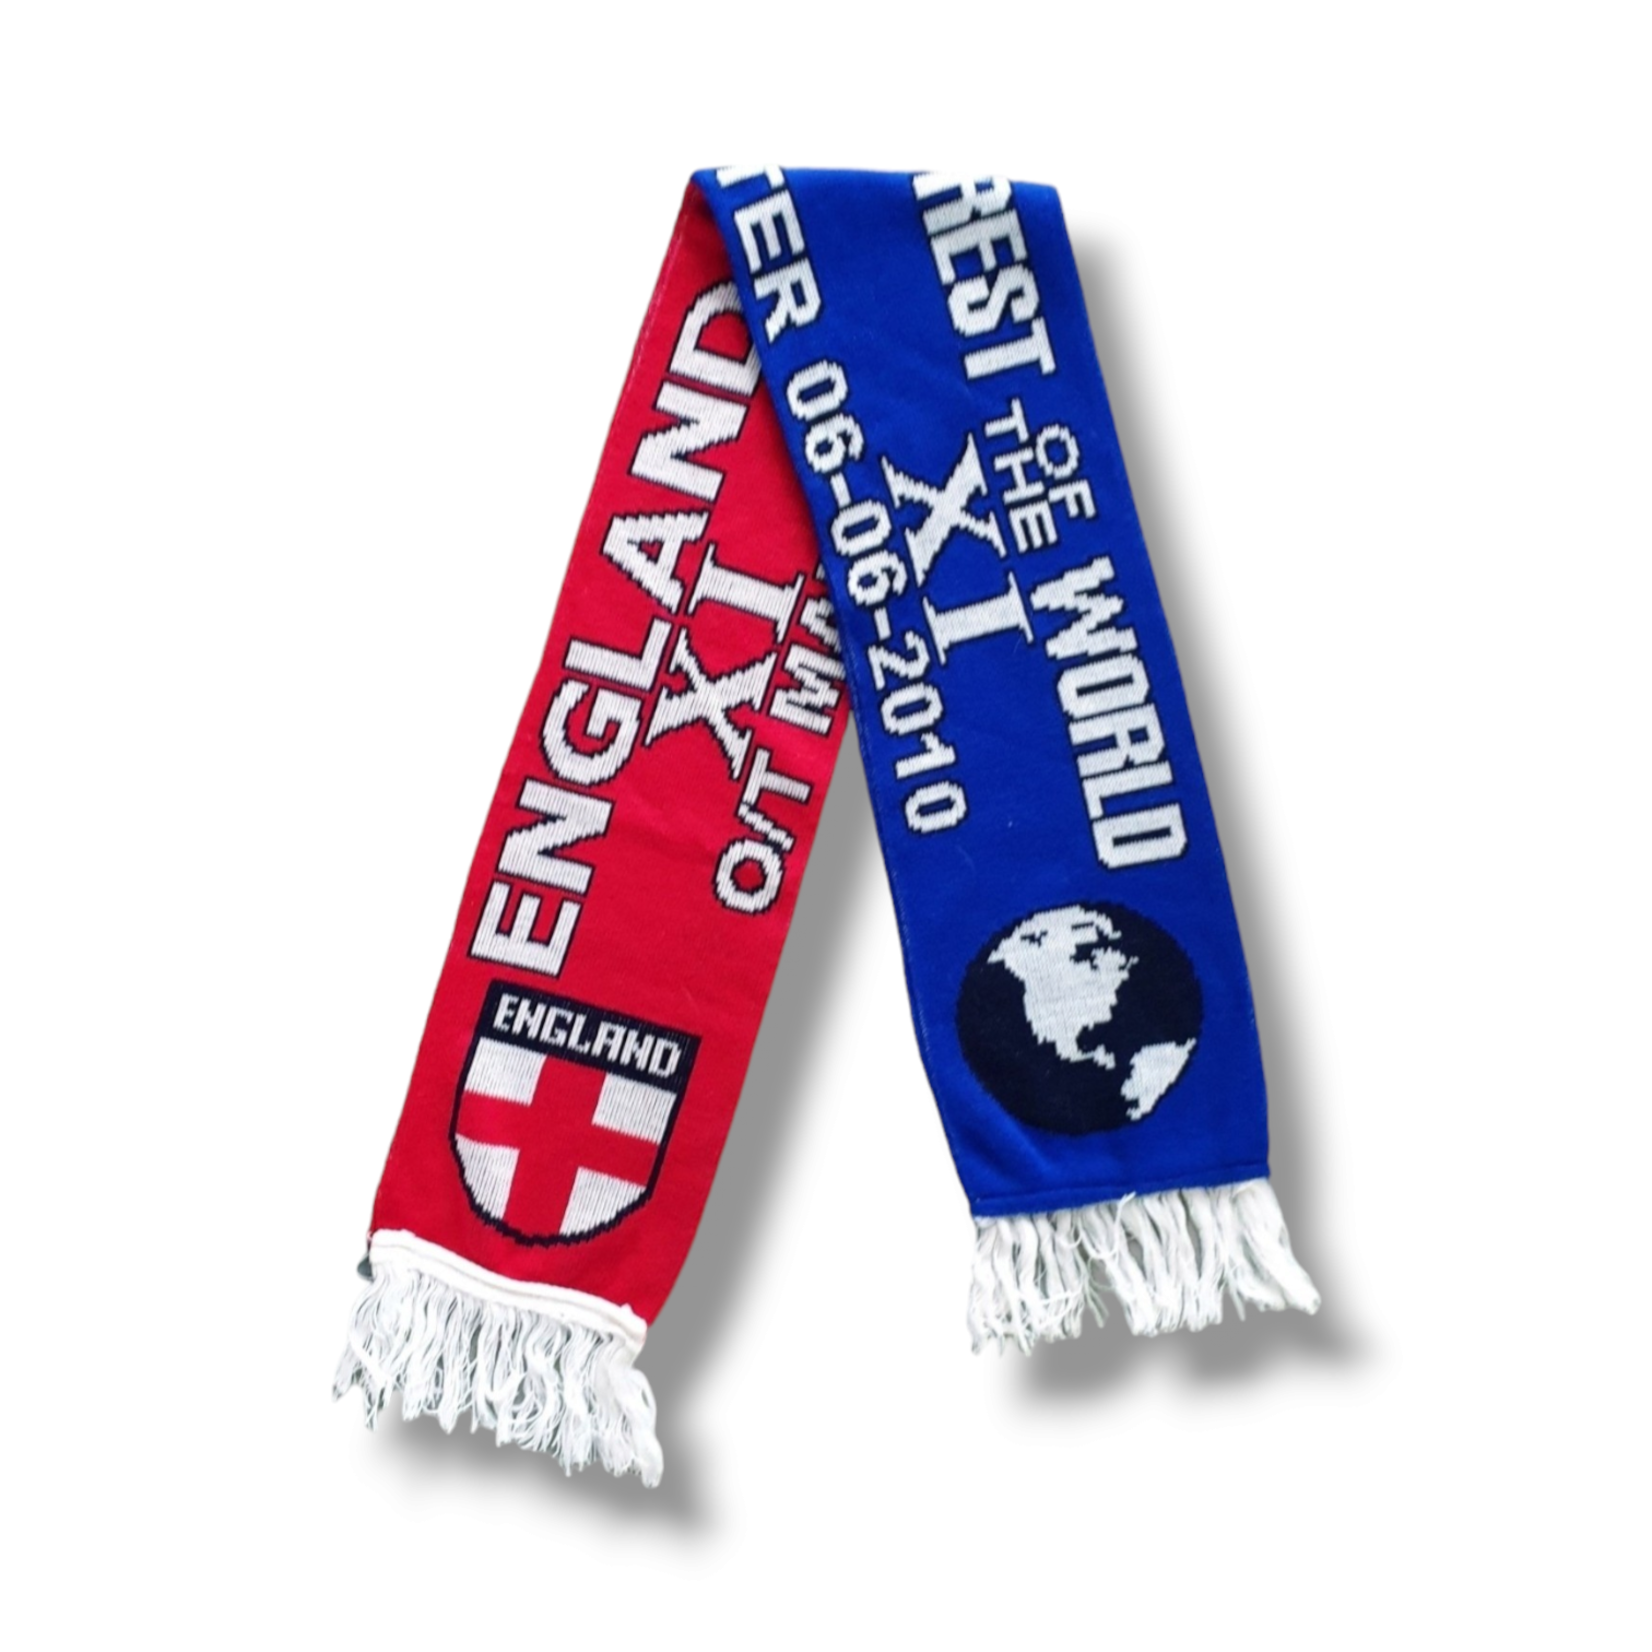 Scarf Original Rugby Fan Scarf England vs Rest of the World 2010